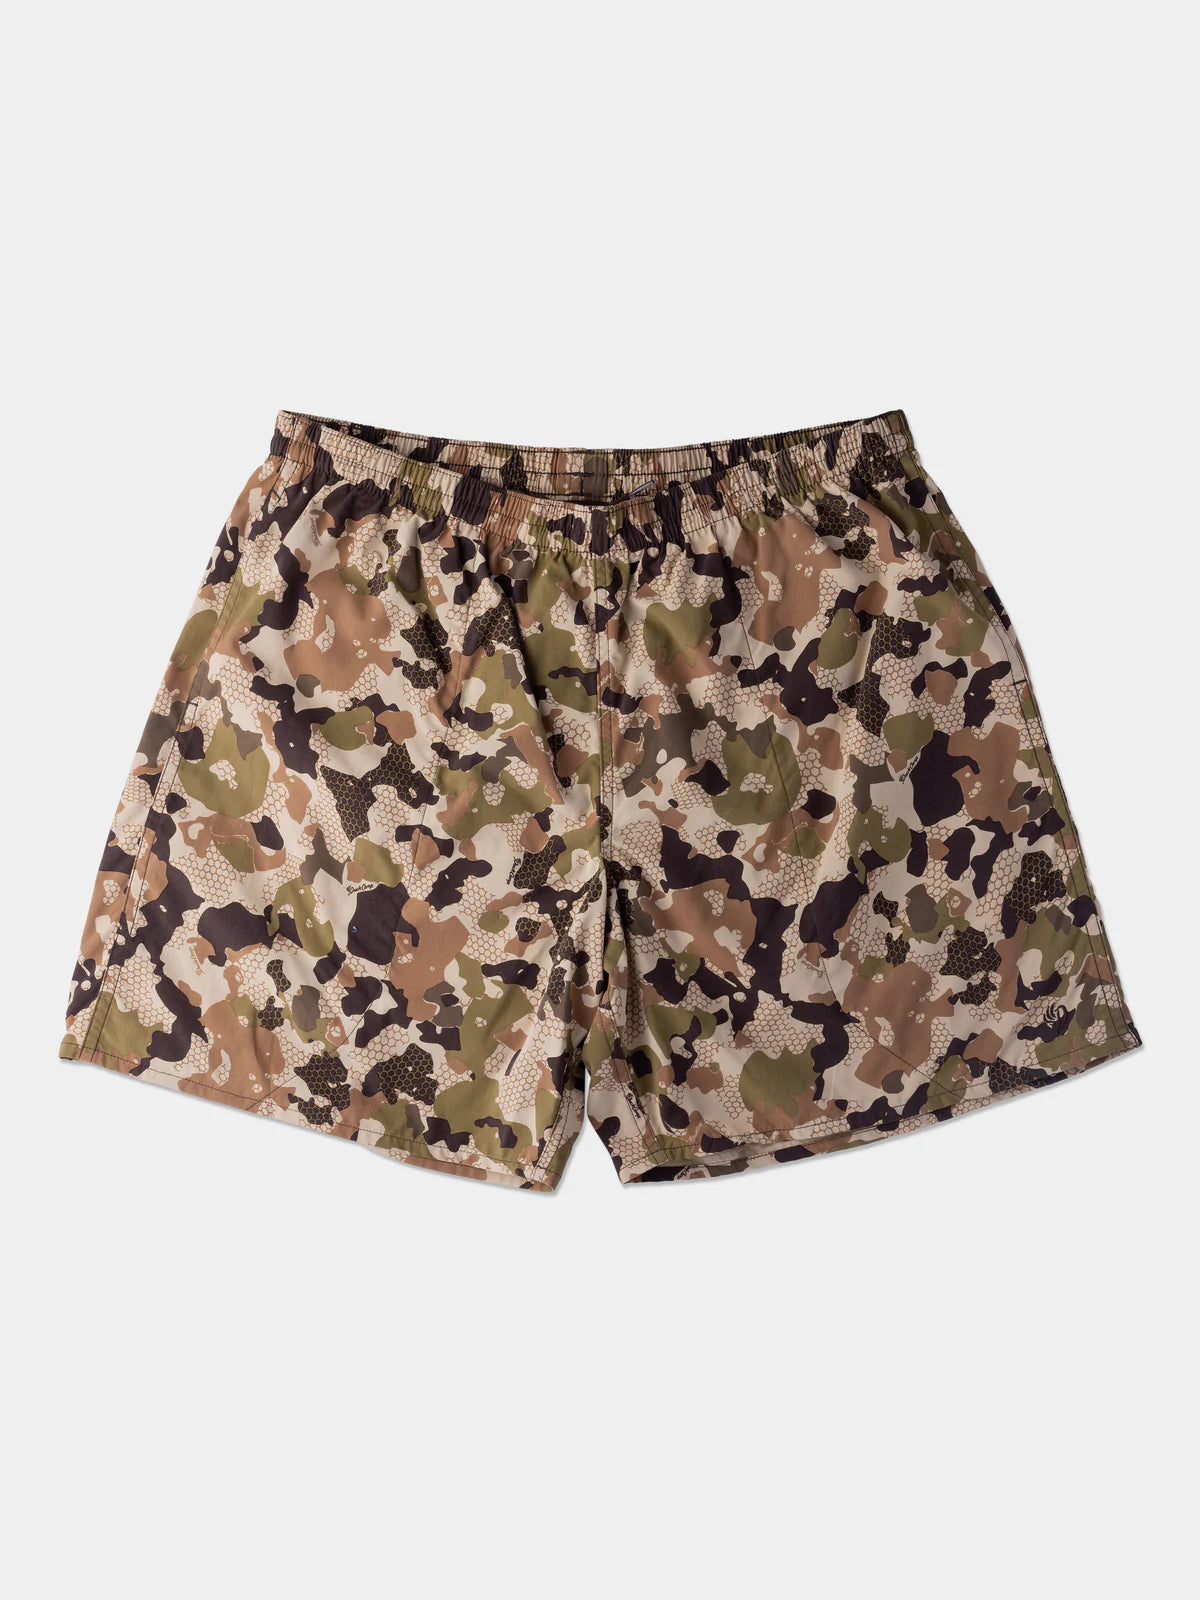 Duck Camp, Scout Shorts 5" - Wetland